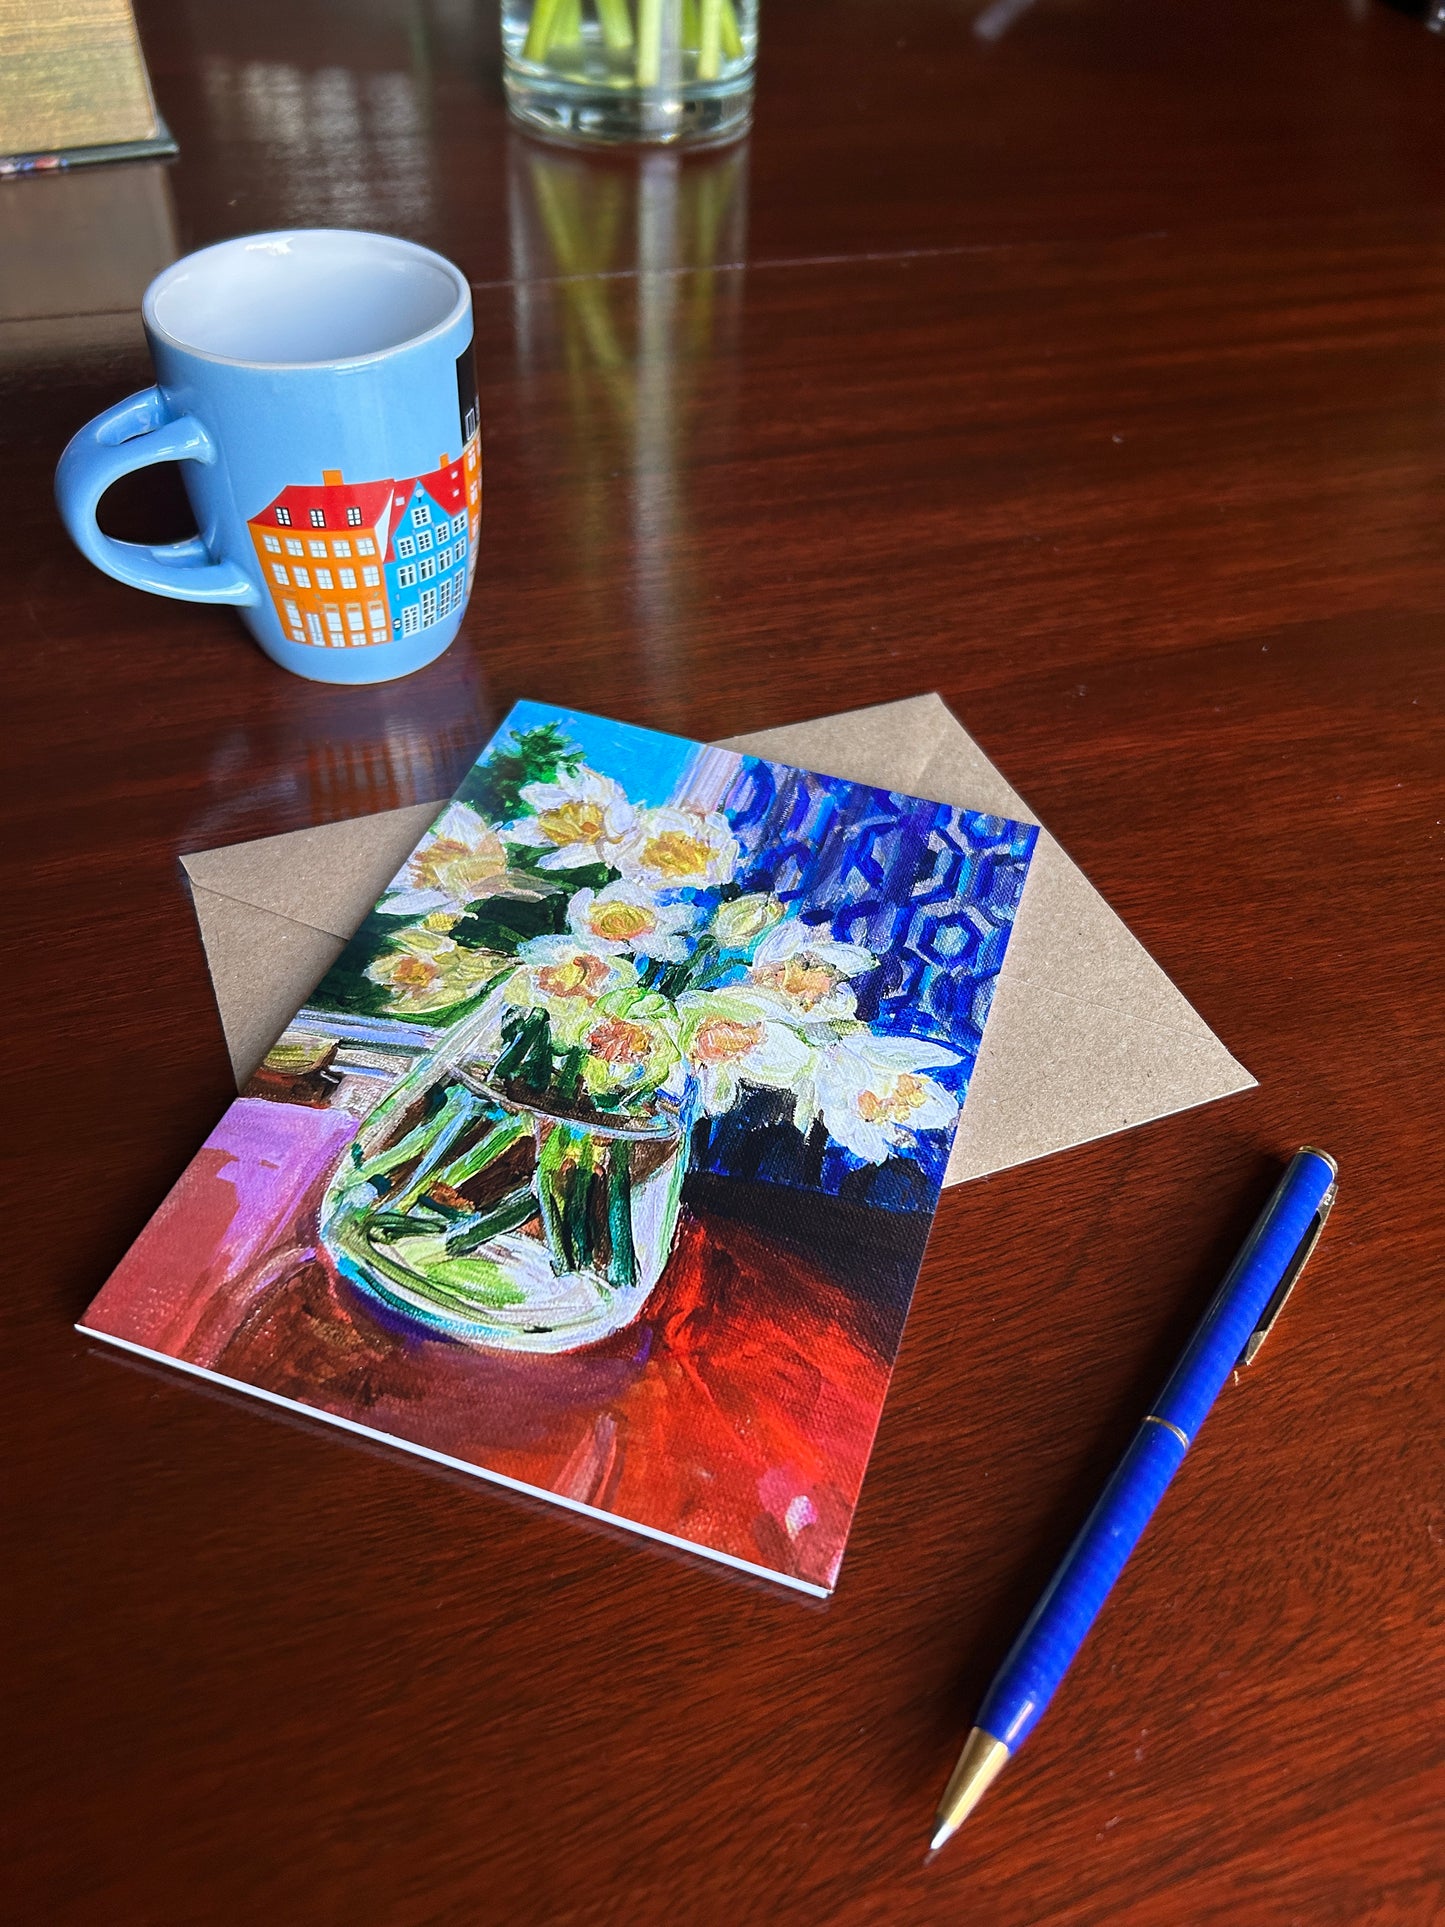 Greetings card of daffodils in a glass vase. Displayed with brown envelope on a wooden table with pen beside and mug behind.